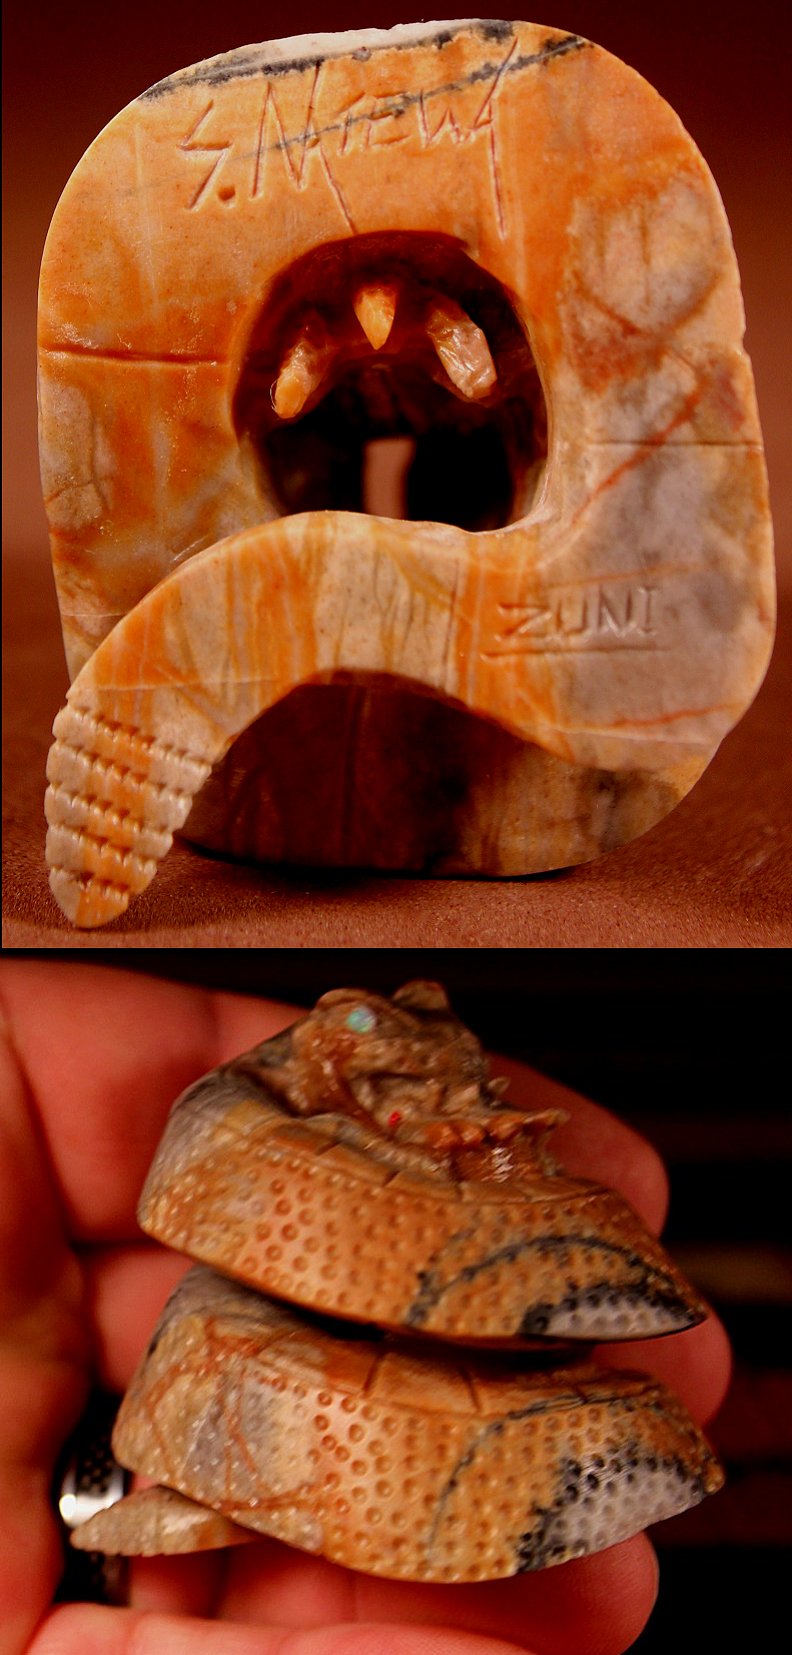 Zuni Spirits is proud to represent a variety of Zuni fetish carvers, including Staley Natewa (d.)!